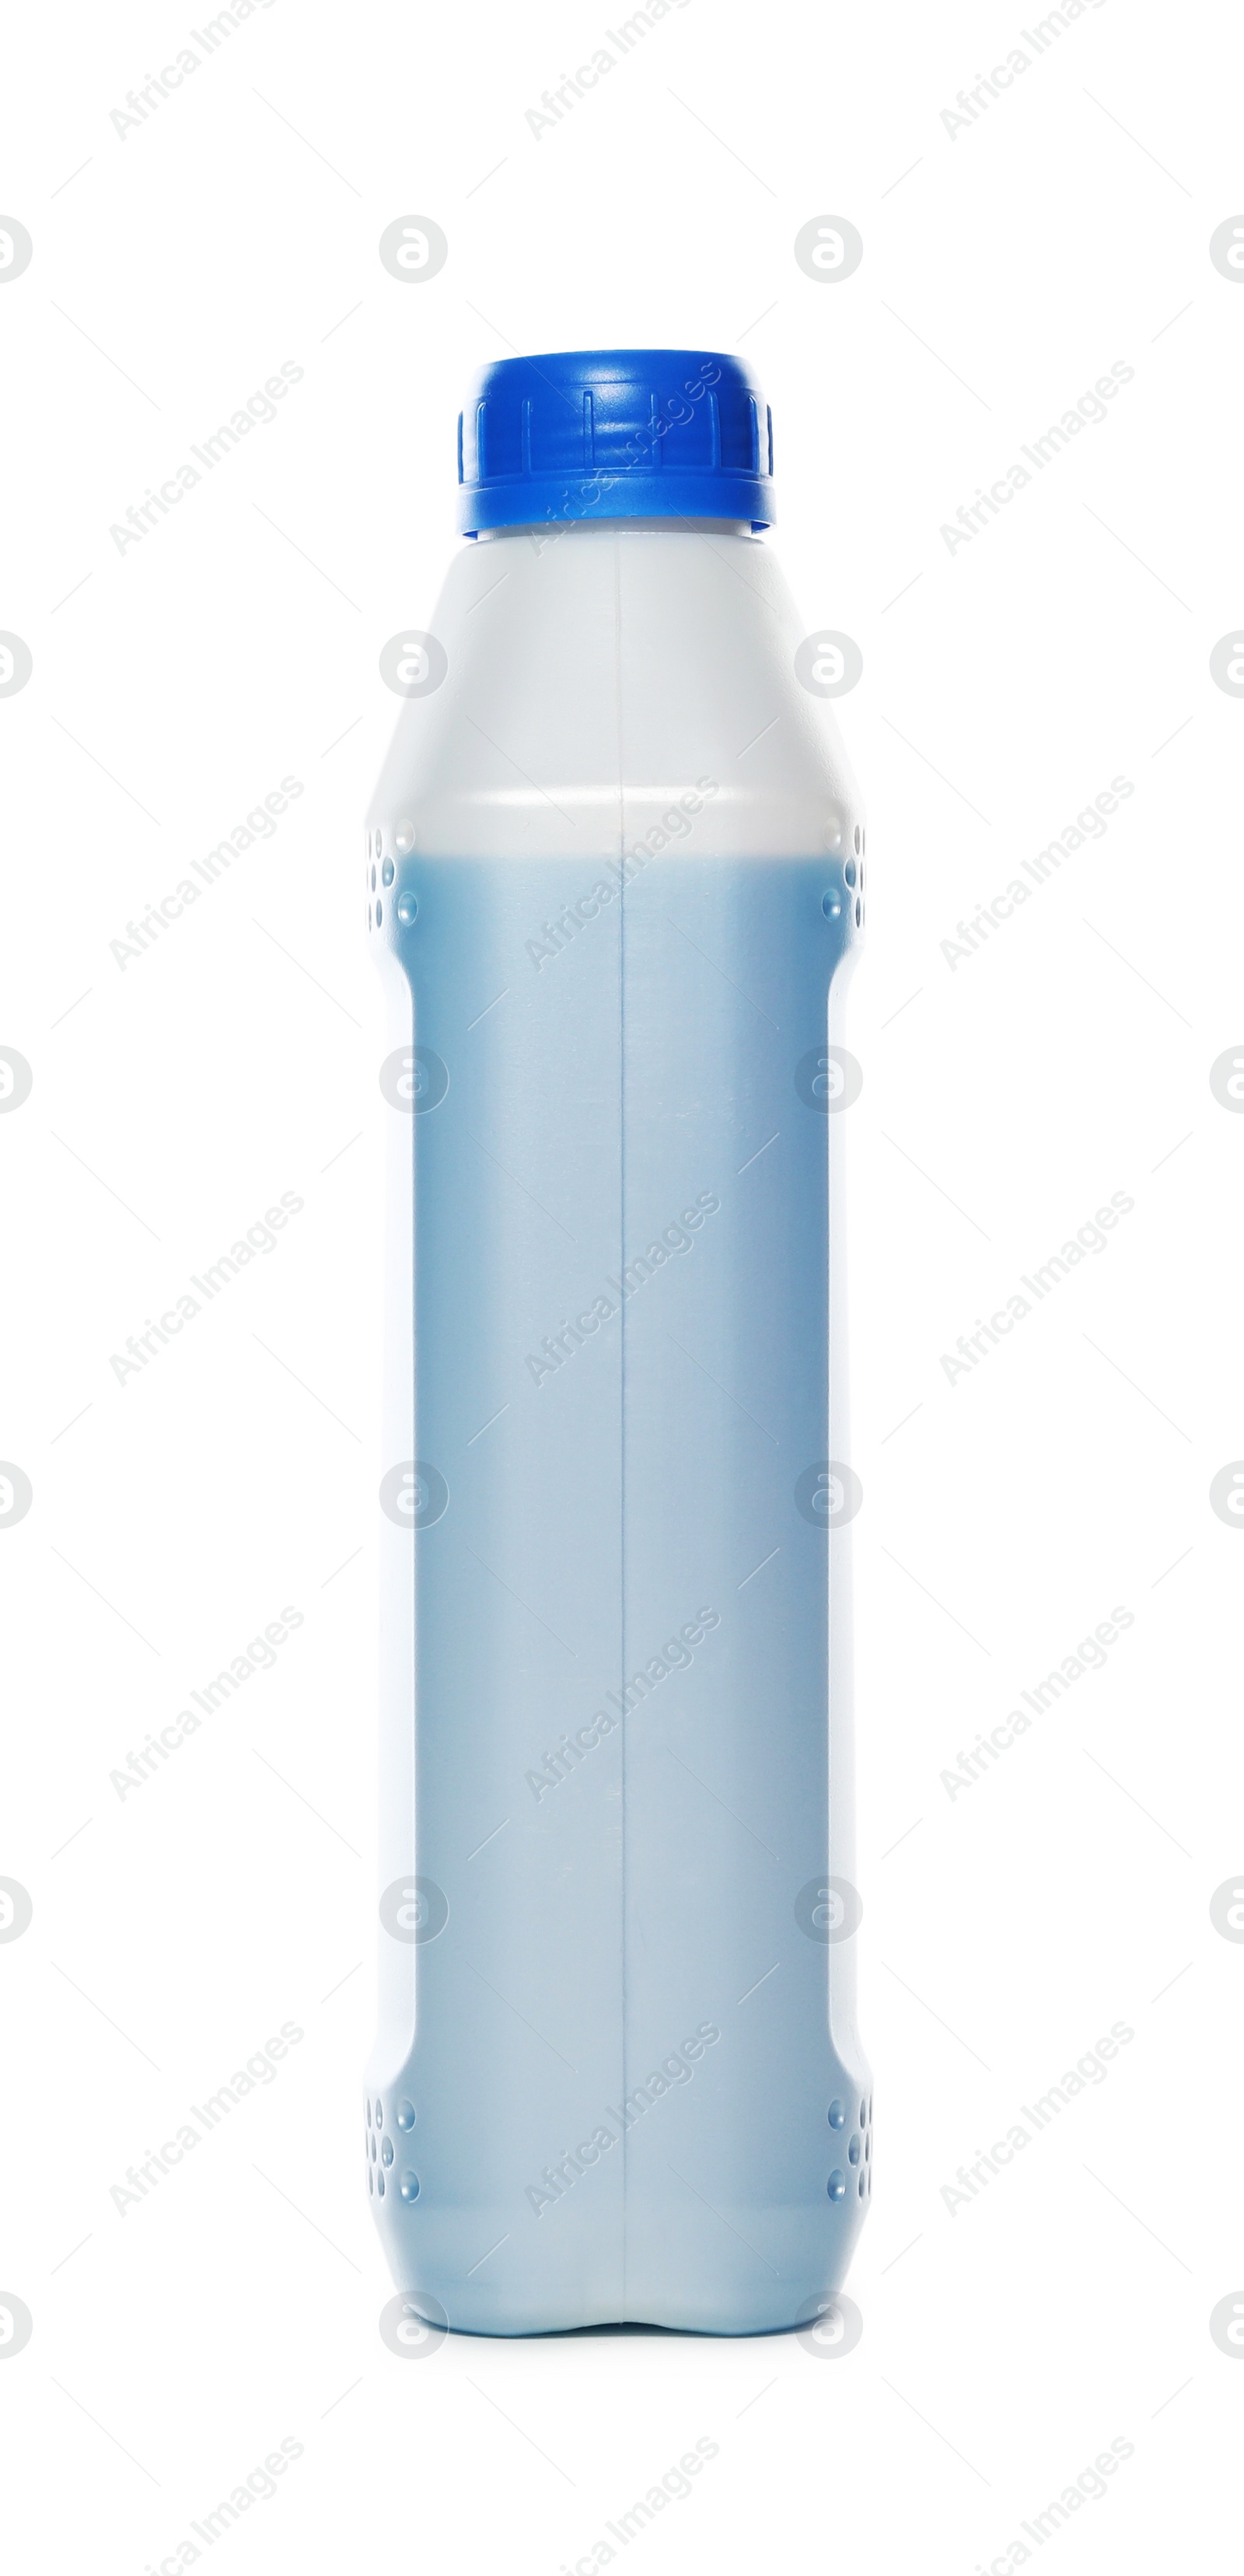 Photo of Antifreeze in plastic bottle isolated on white